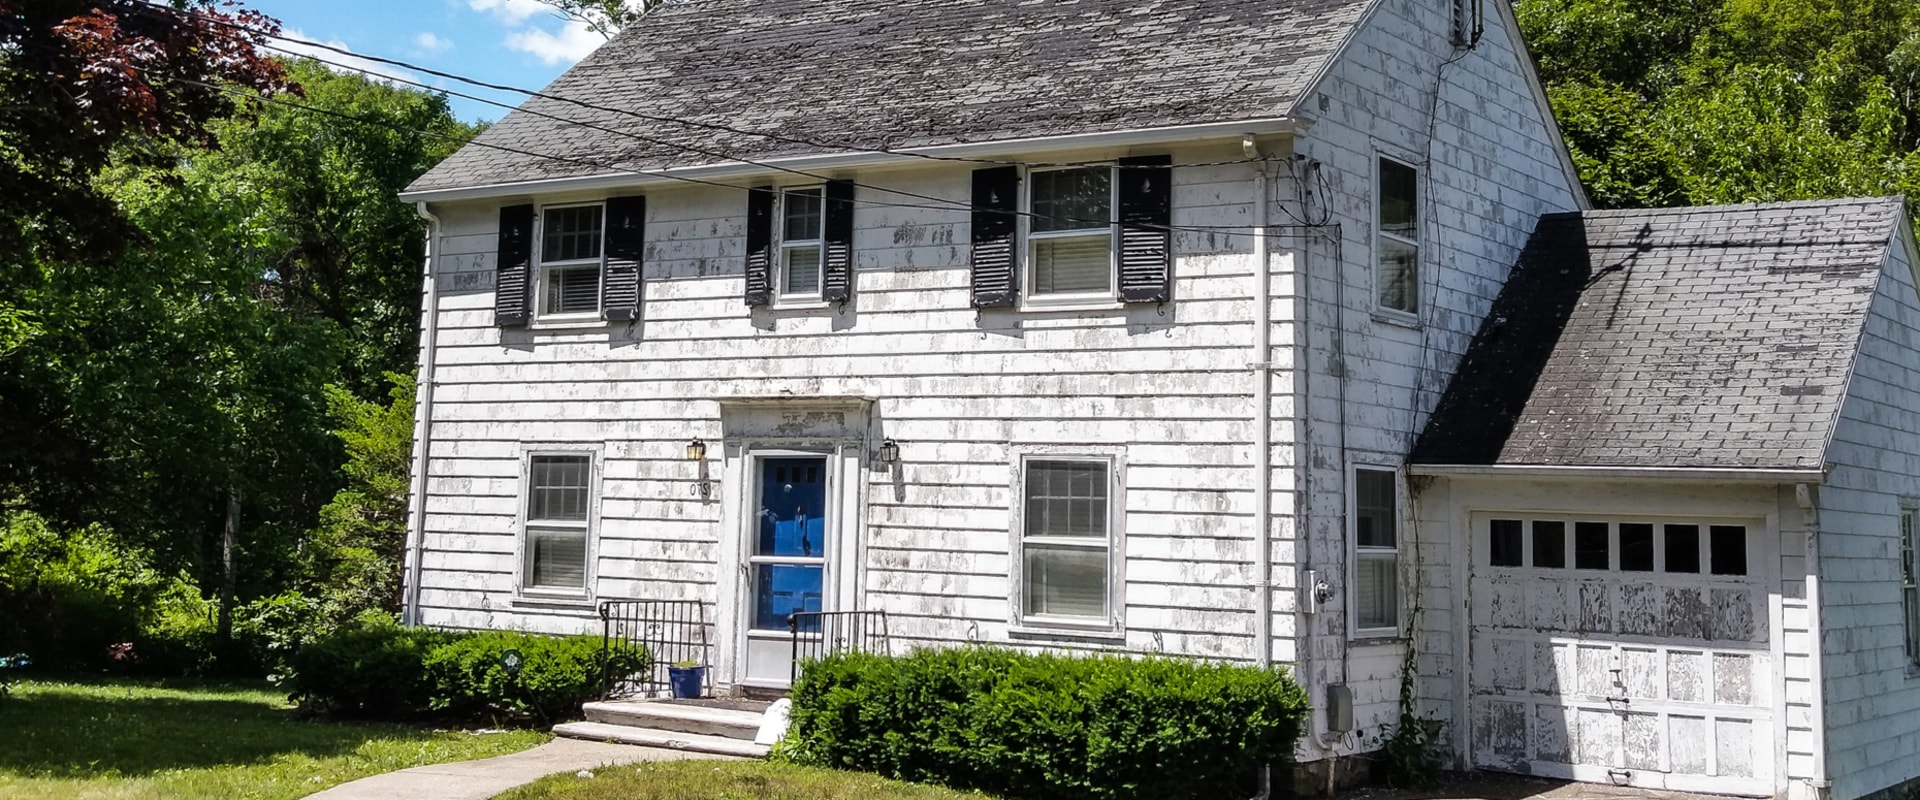 Is fixing up an old house worth it?